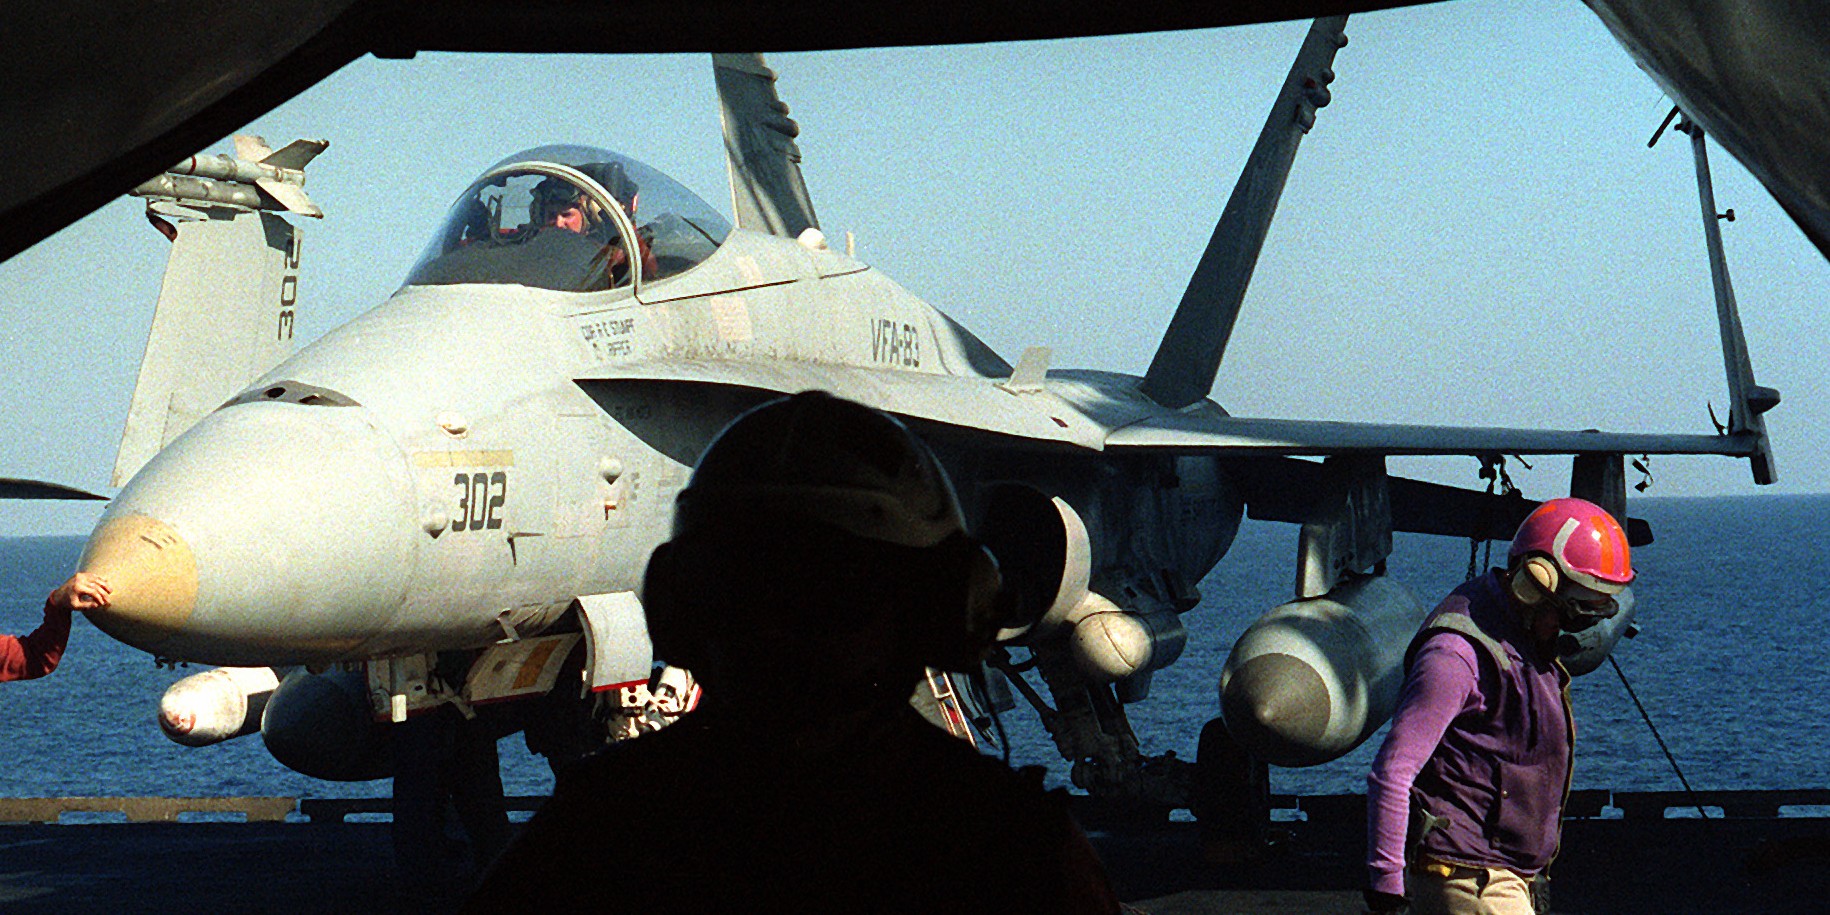 vfa-83 rampagers strike fighter squadron f/a-18c hornet cvw-17 uss saratoga cv-60 155